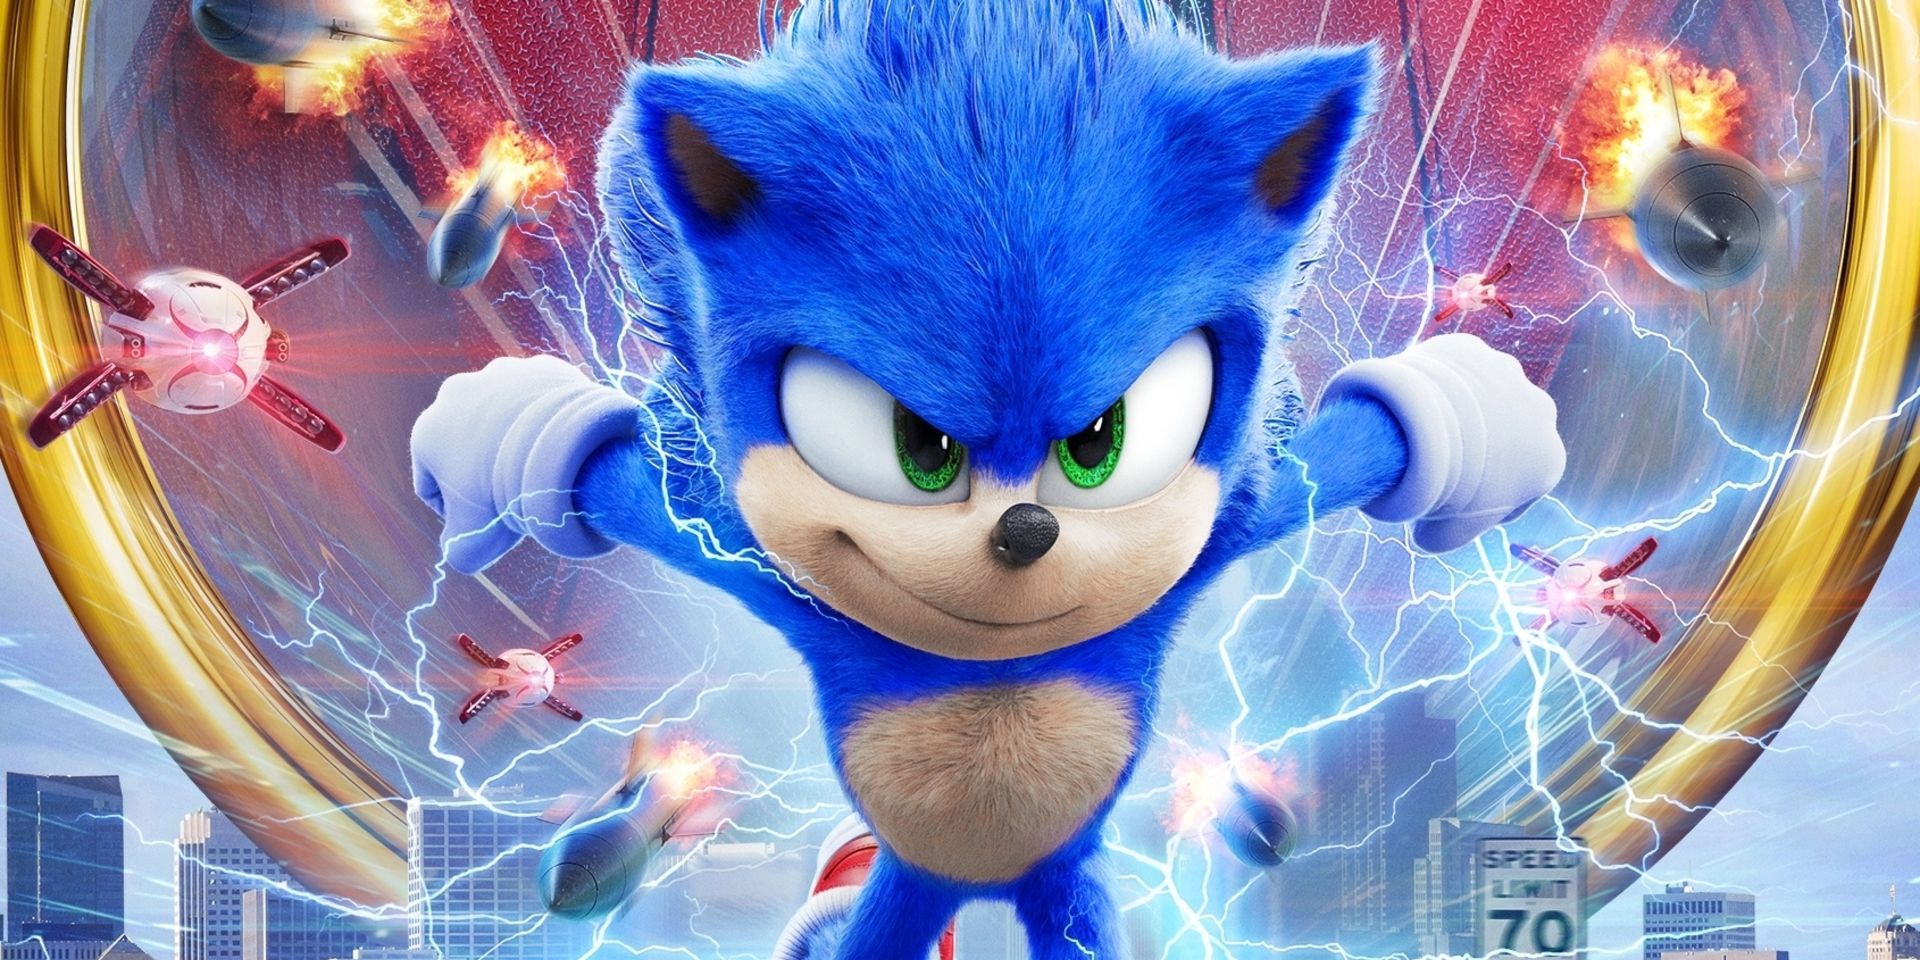 Sonic movie redesign leaks, here's a closer look - 9to5Toys